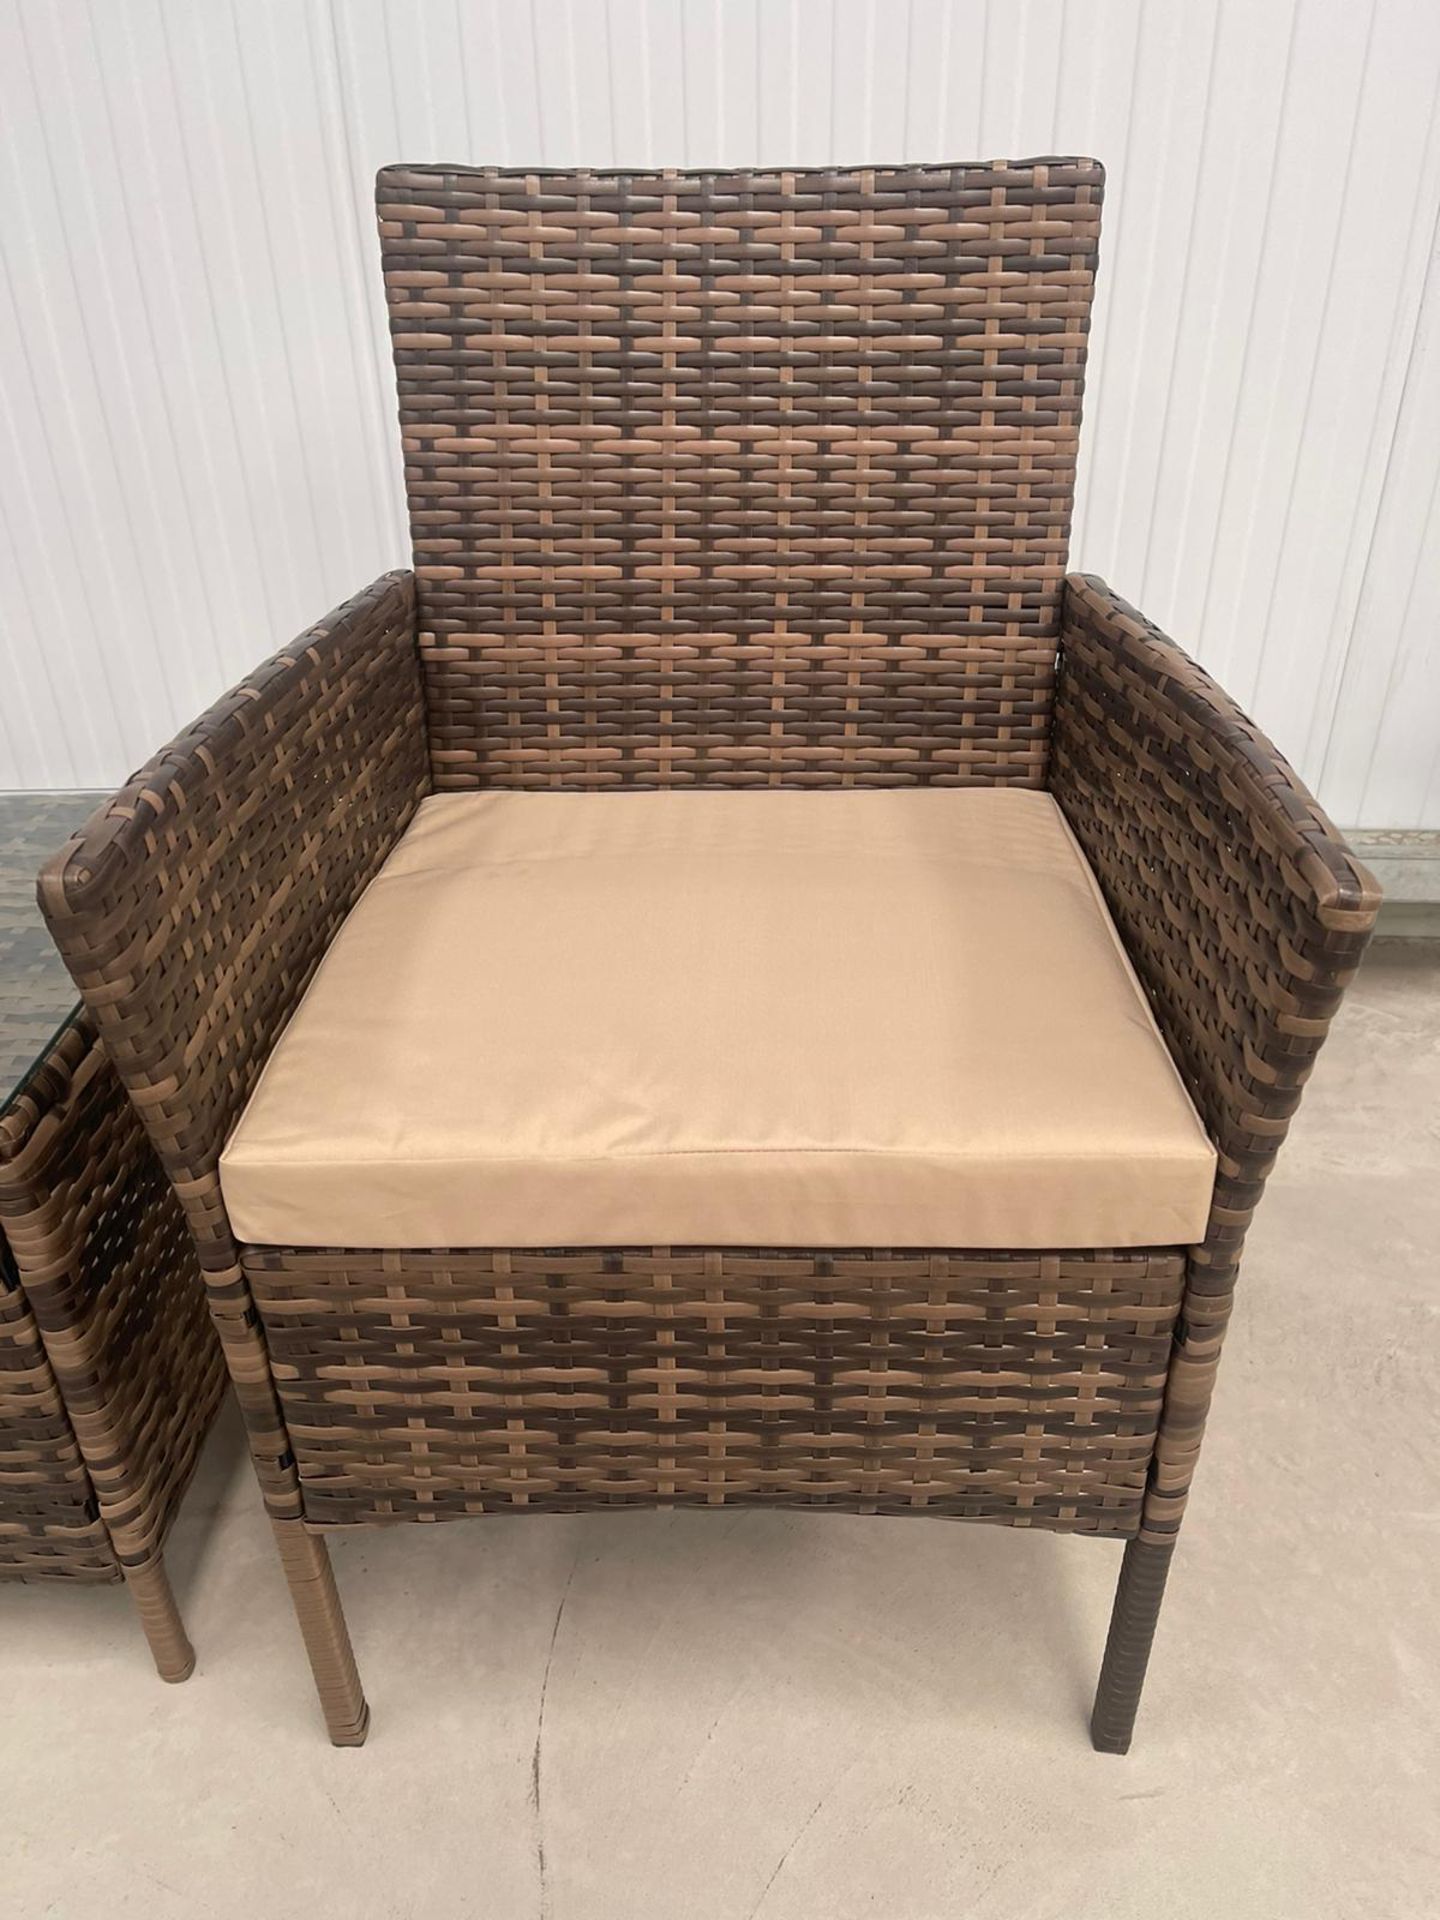 RRP £199 - NEW BROWN BISTRO SET. TABLE 40 X 40 X 45CM, CHAIR 52 X 56 X 83CM - Image 4 of 4